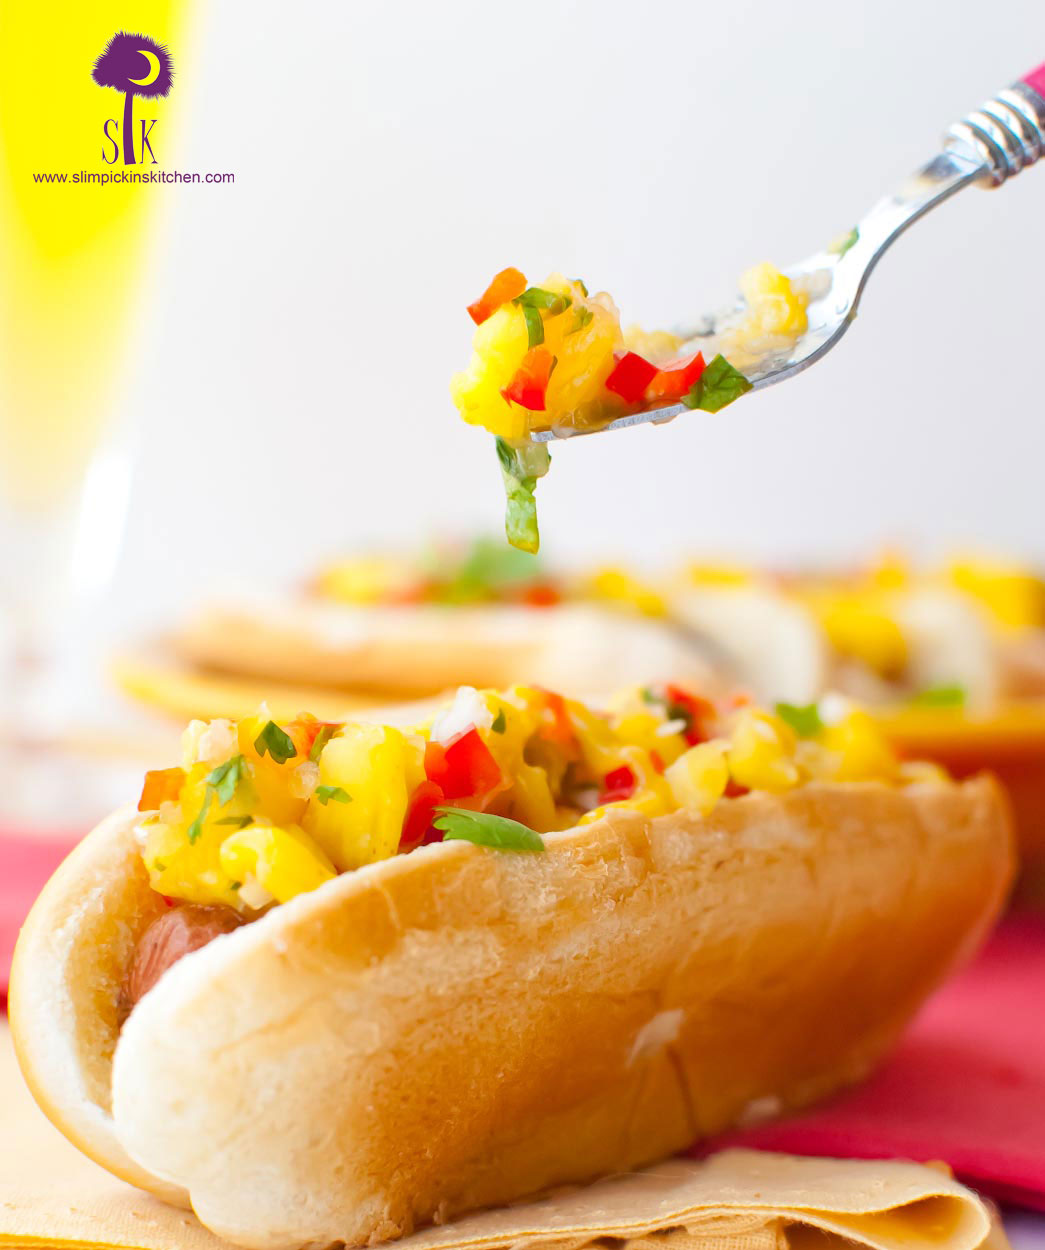 Mini Hot Dogs with Tulip Vienna Sausages and Pineapple Sauce